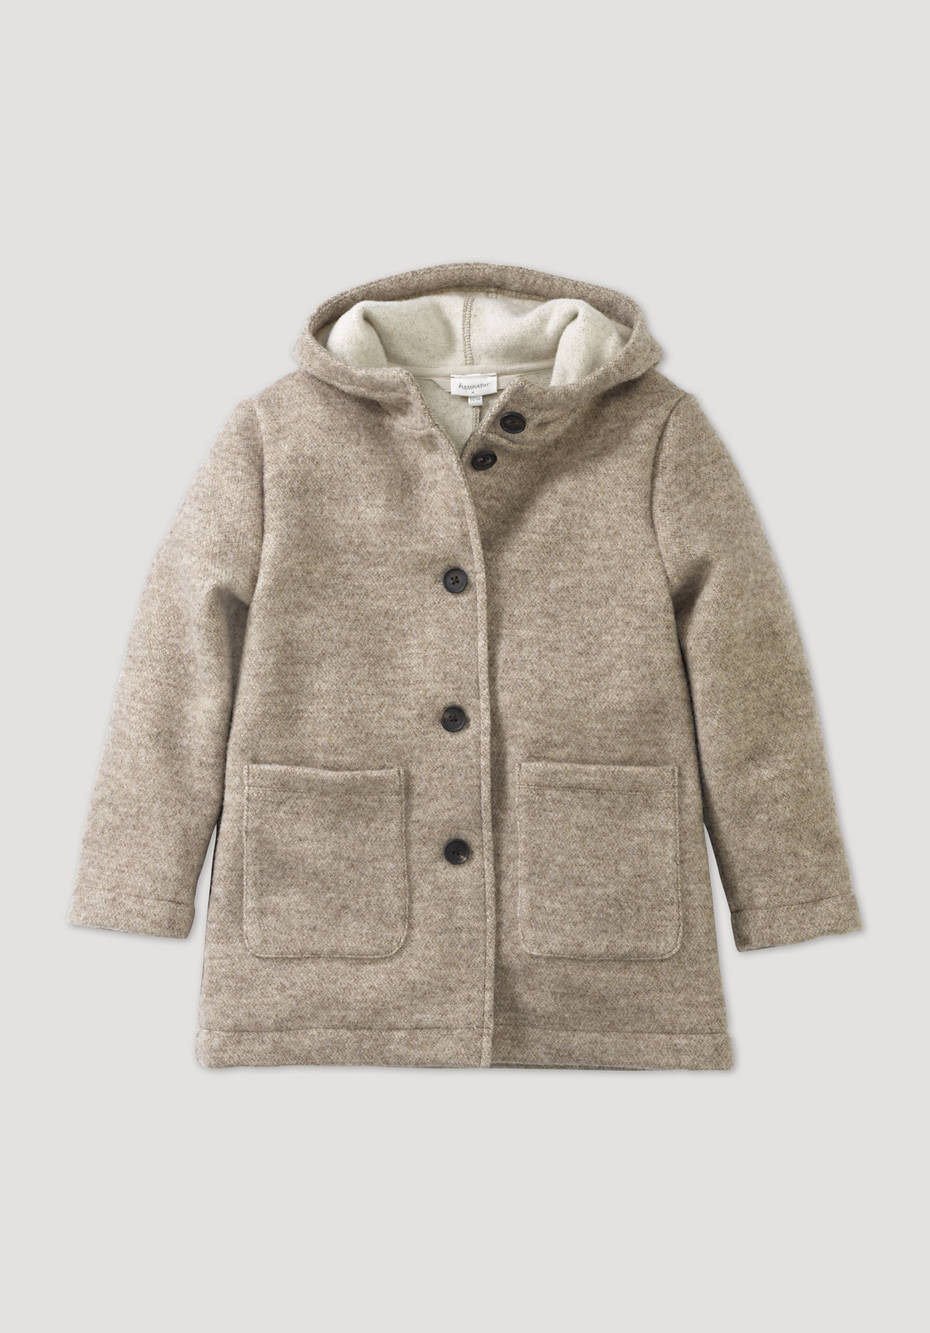 Rhön coat with a hood made of pure new wool